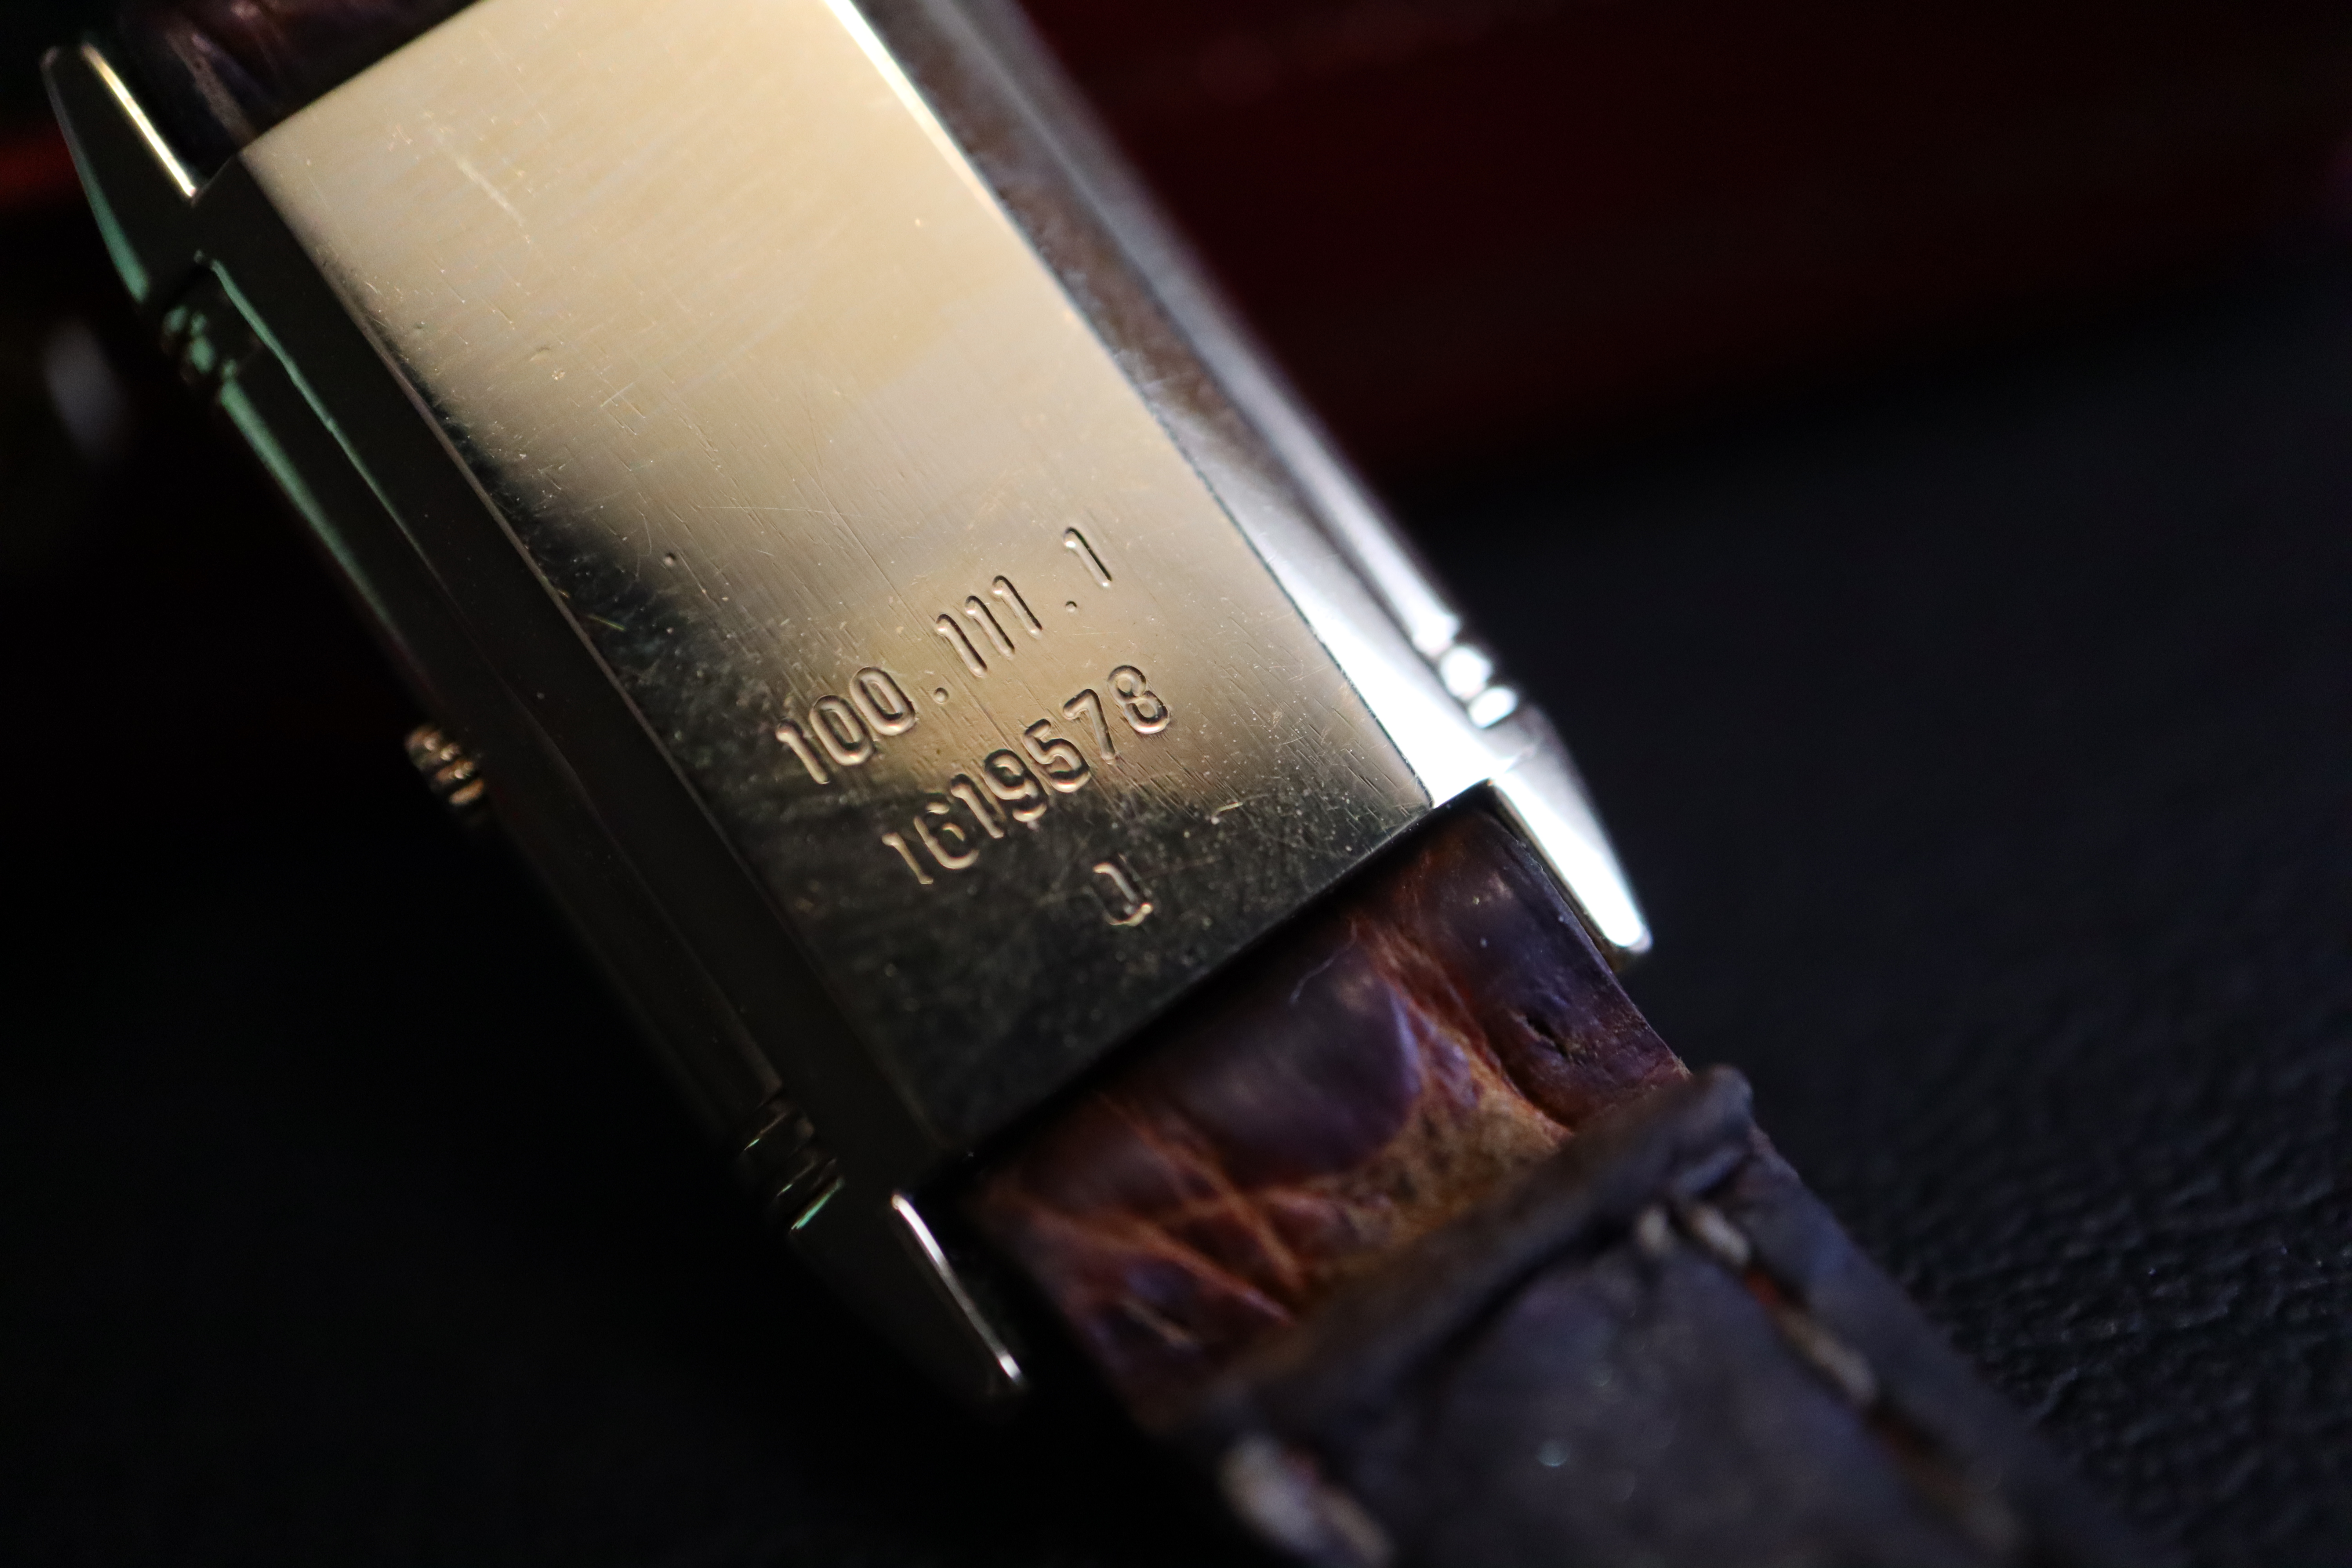 JAEGER-LE COULTRE 'DIAMOND' REVERSO (REF. 100.111.1) - 18CT YELLOW GOLD '750' HALLMARKED - Image 3 of 5